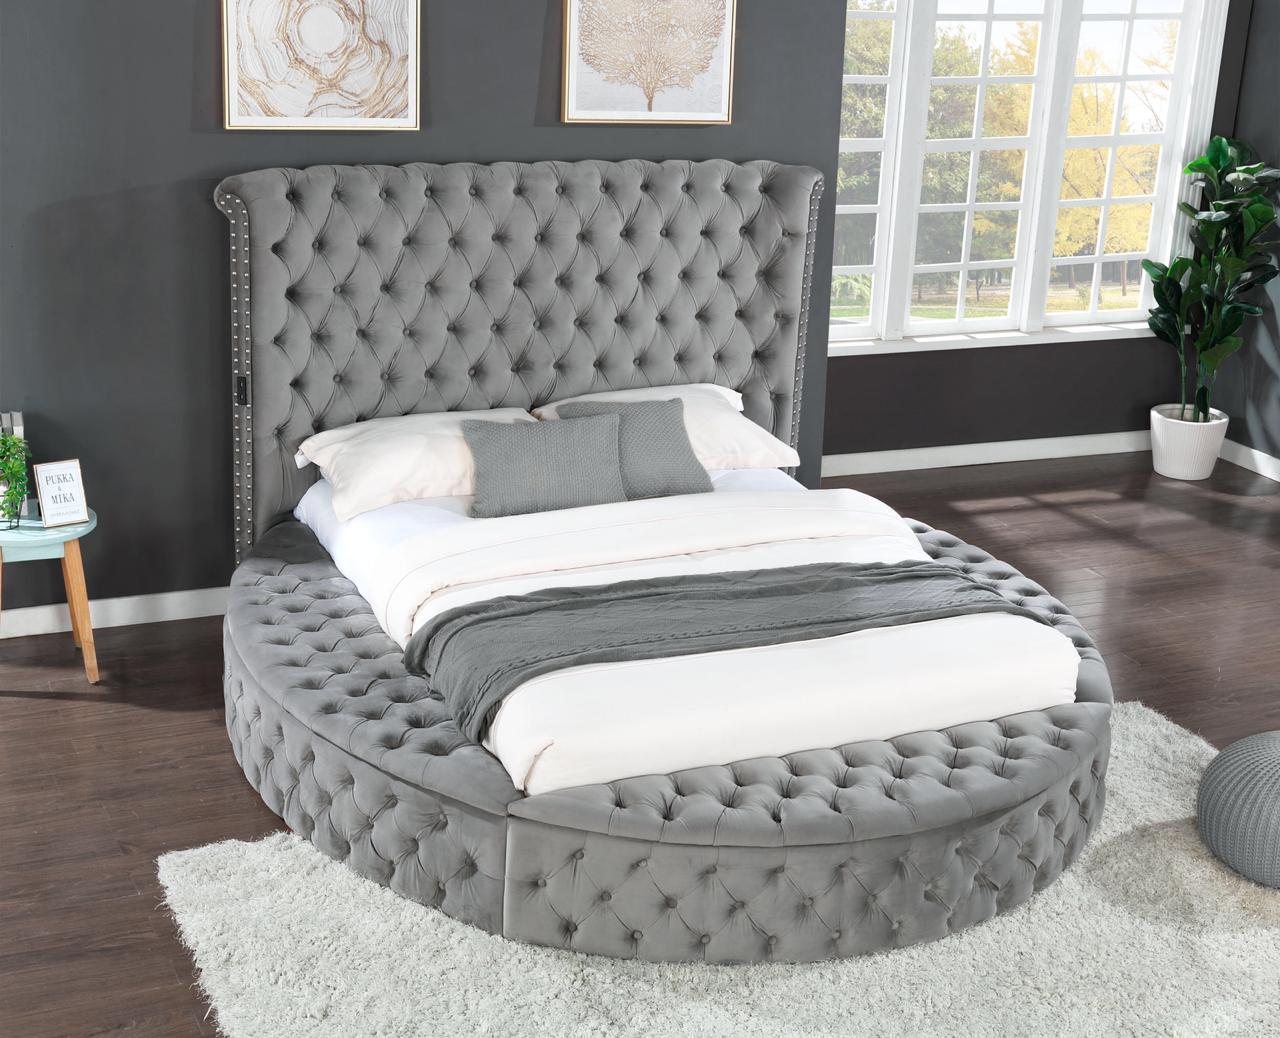 Queen Size Tufted Storage Bed made with Wood (Gray)